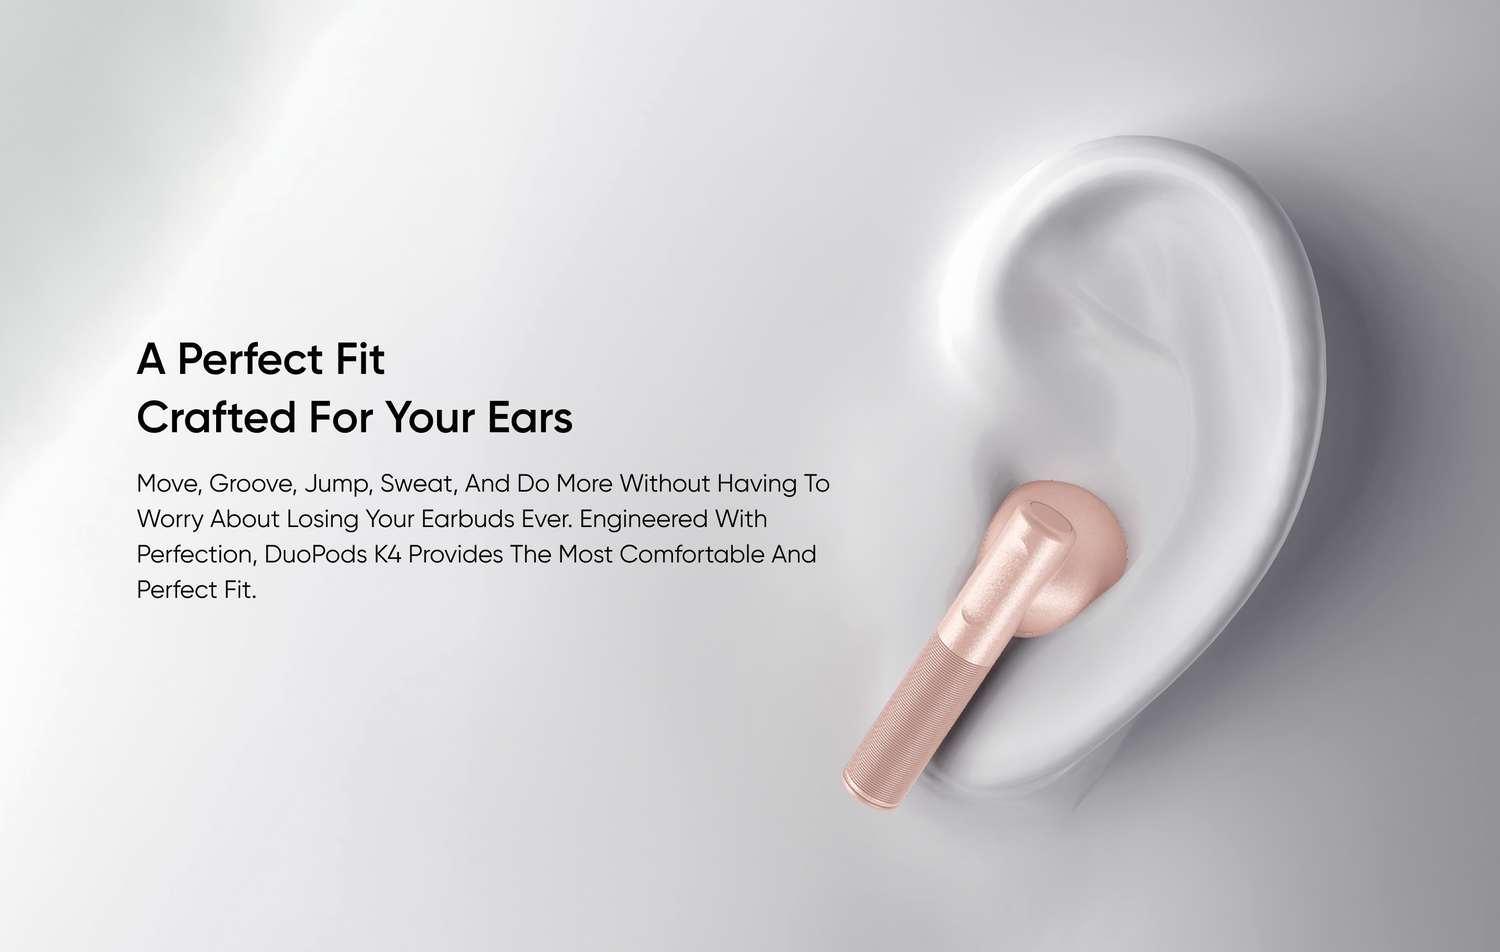 A Perfect Fit 
Crafted for Your Ears
Move, groove, jump, sweat, and do more without having to worry about losing your earbuds ever. Engineered with perfection, DuoPods K4 provides the most comfortable and perfect fit.